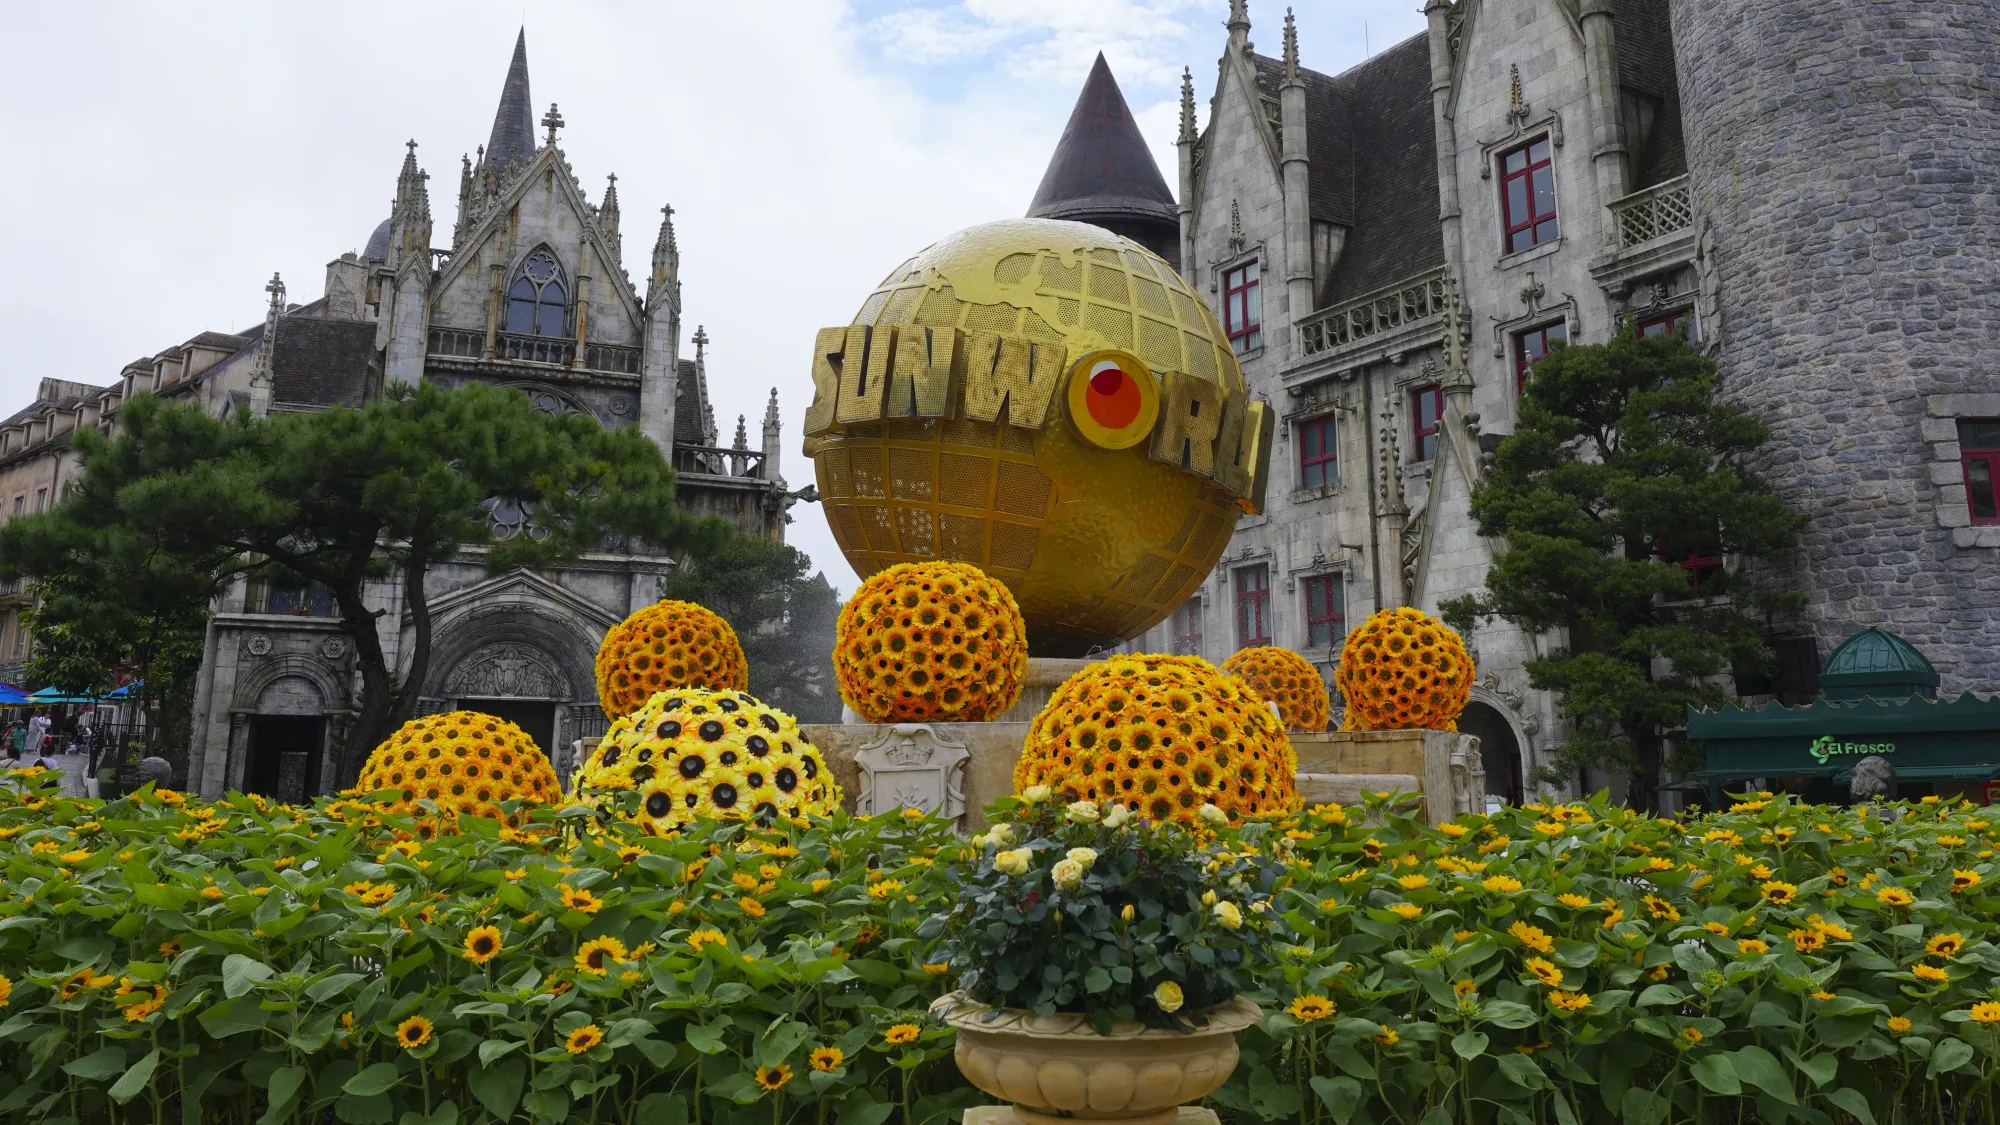 Golden Globe with "Sun World" written on it with sun flowers around it and a castle in the background